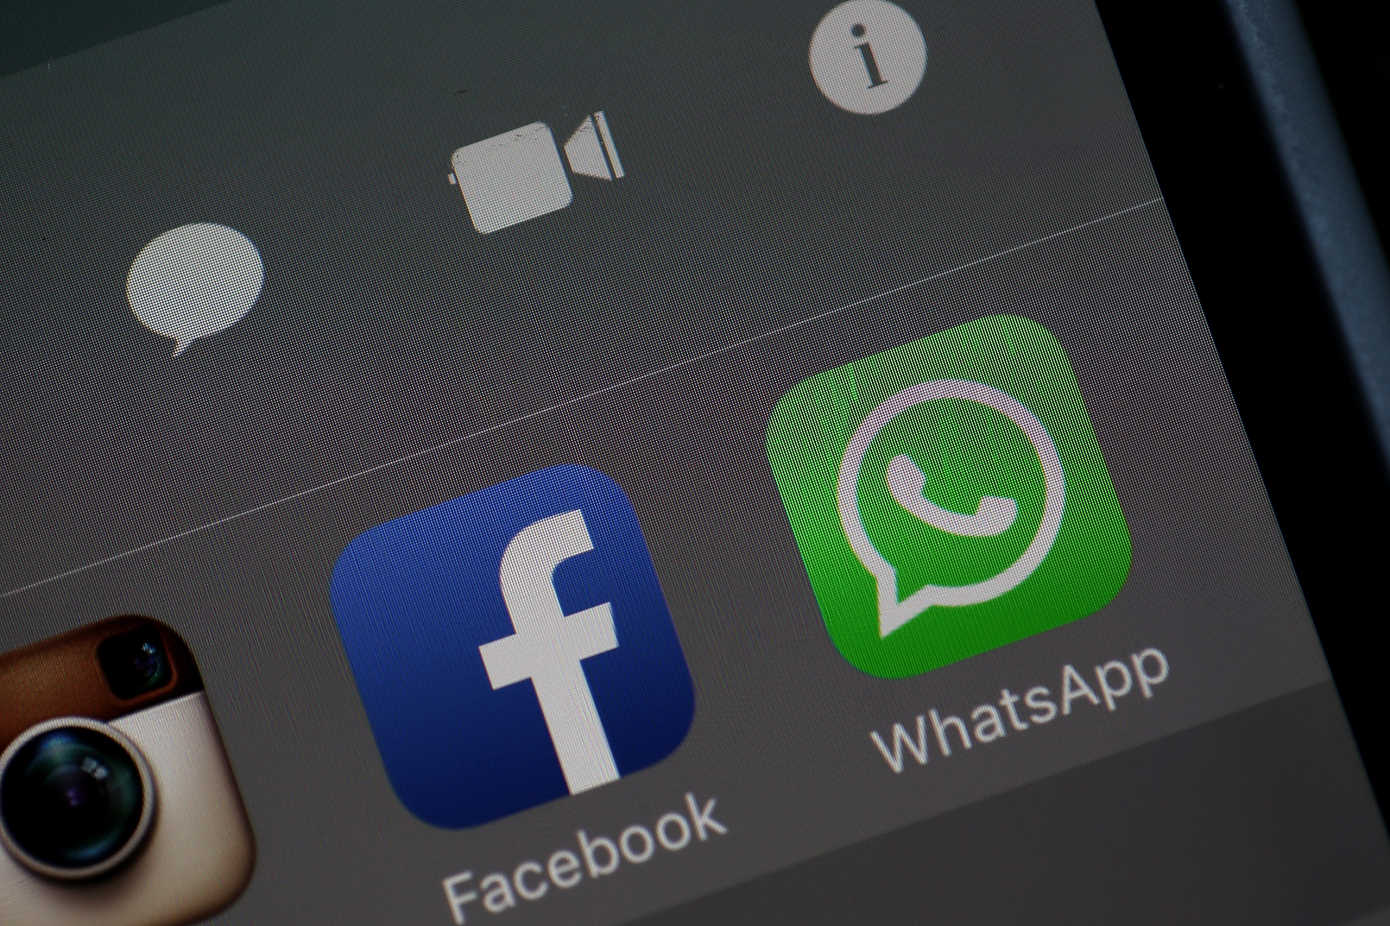 WhatsApp to add multi-device support and introduce “see once” disappearing feature